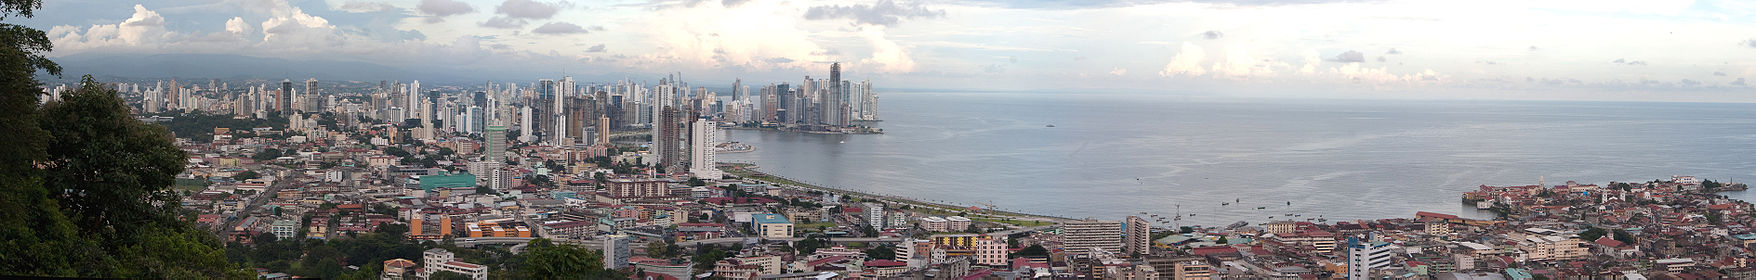 Panama city panoramic view from the top of Ancon hill